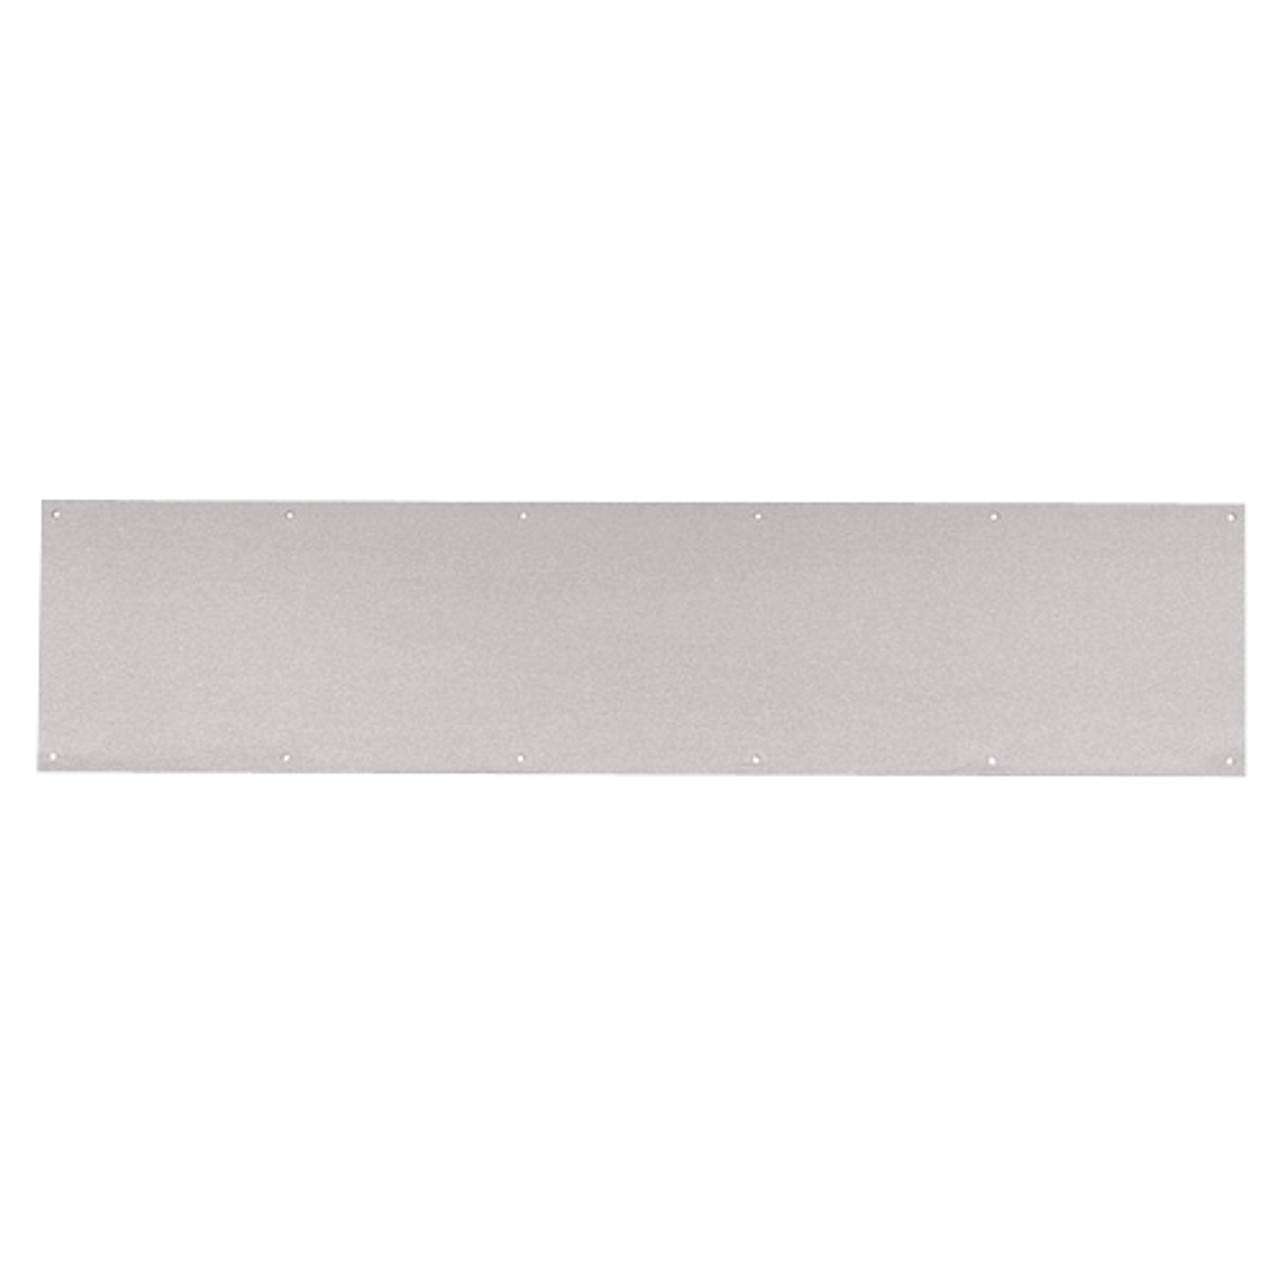 8400-US32D-32x41-B-CS Ives 8400 Series Protection Plate in Satin Stainless Steel